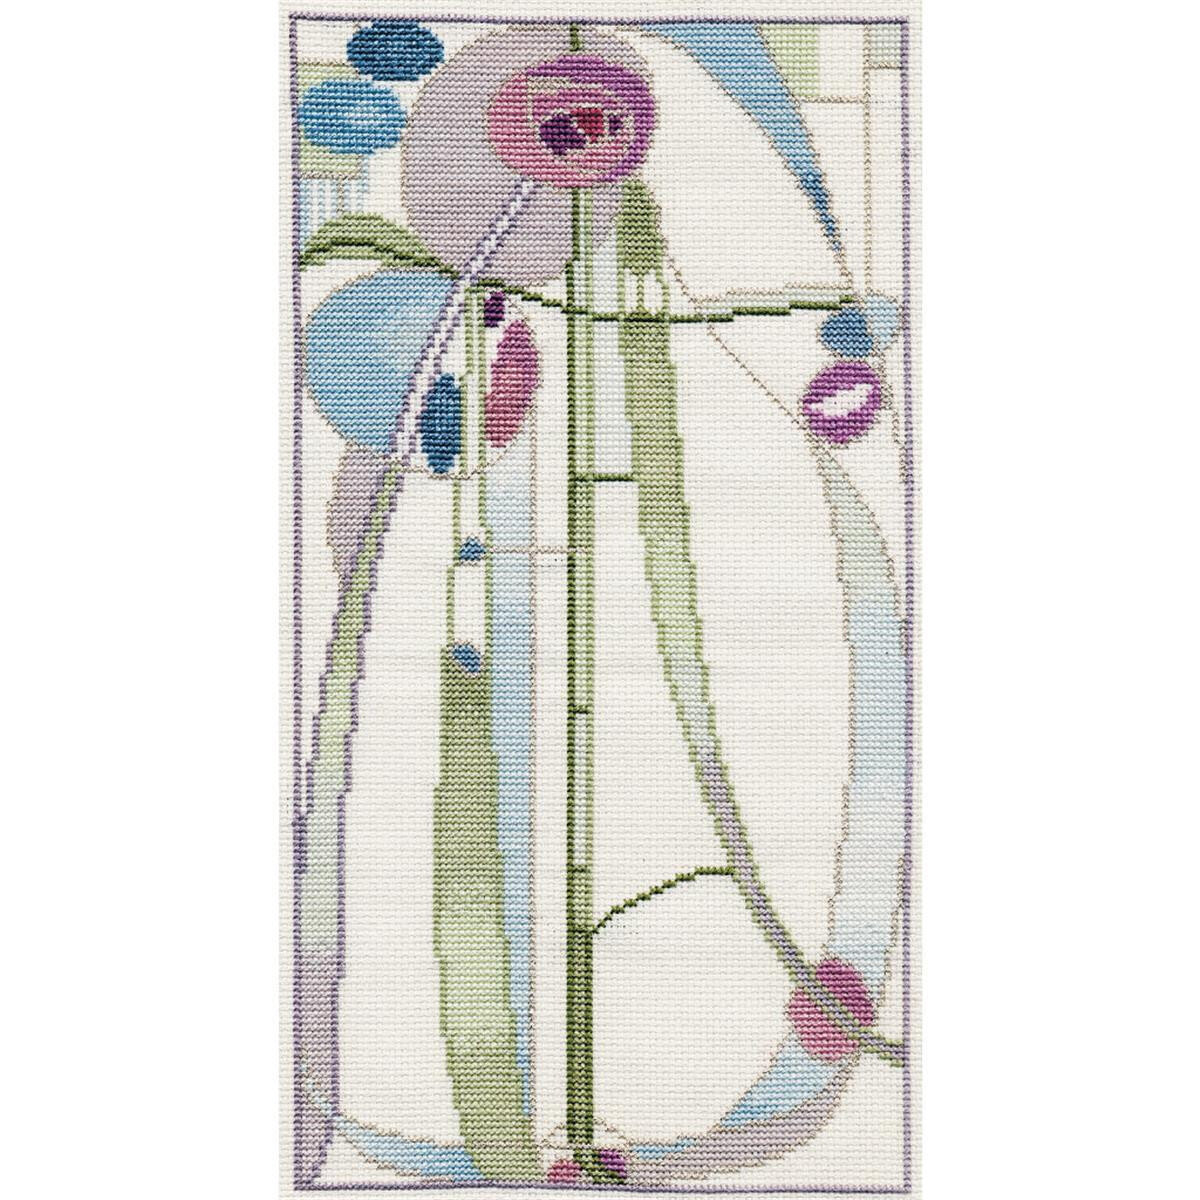 A vertical, rectangular tapestry with an abstract floral...